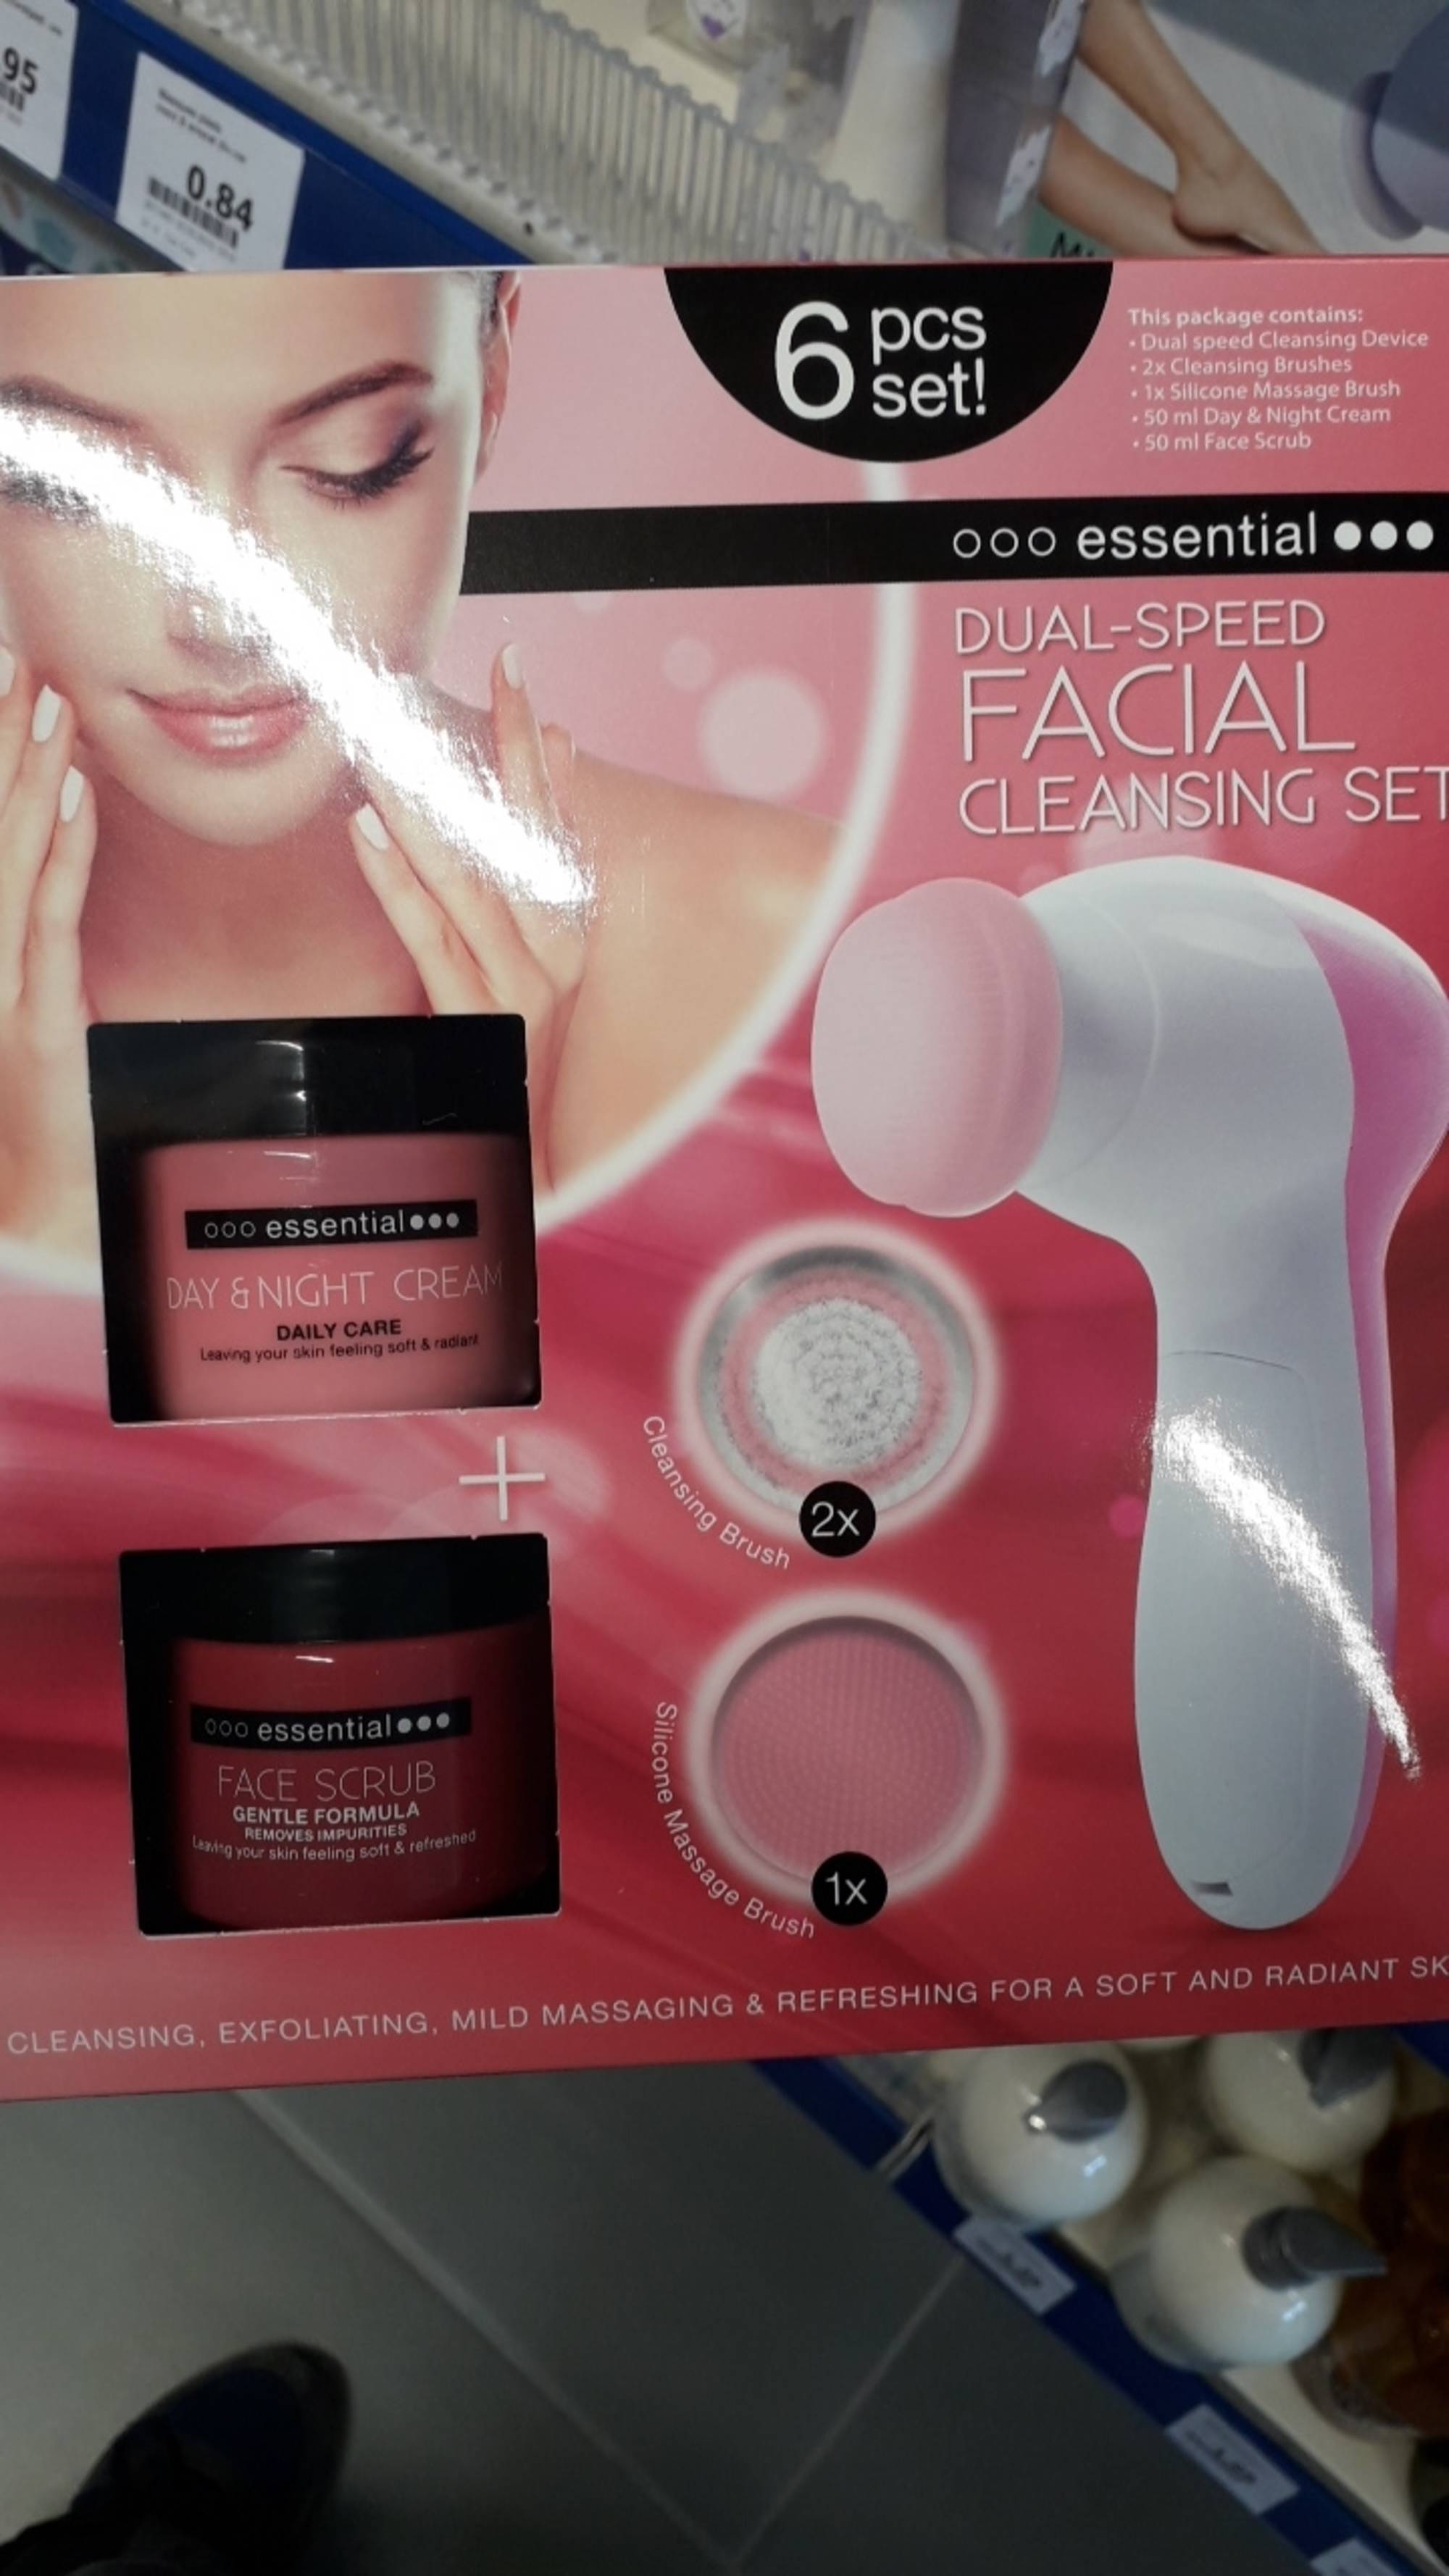 ESSENTIAL - Dual-speed facial cleansing set